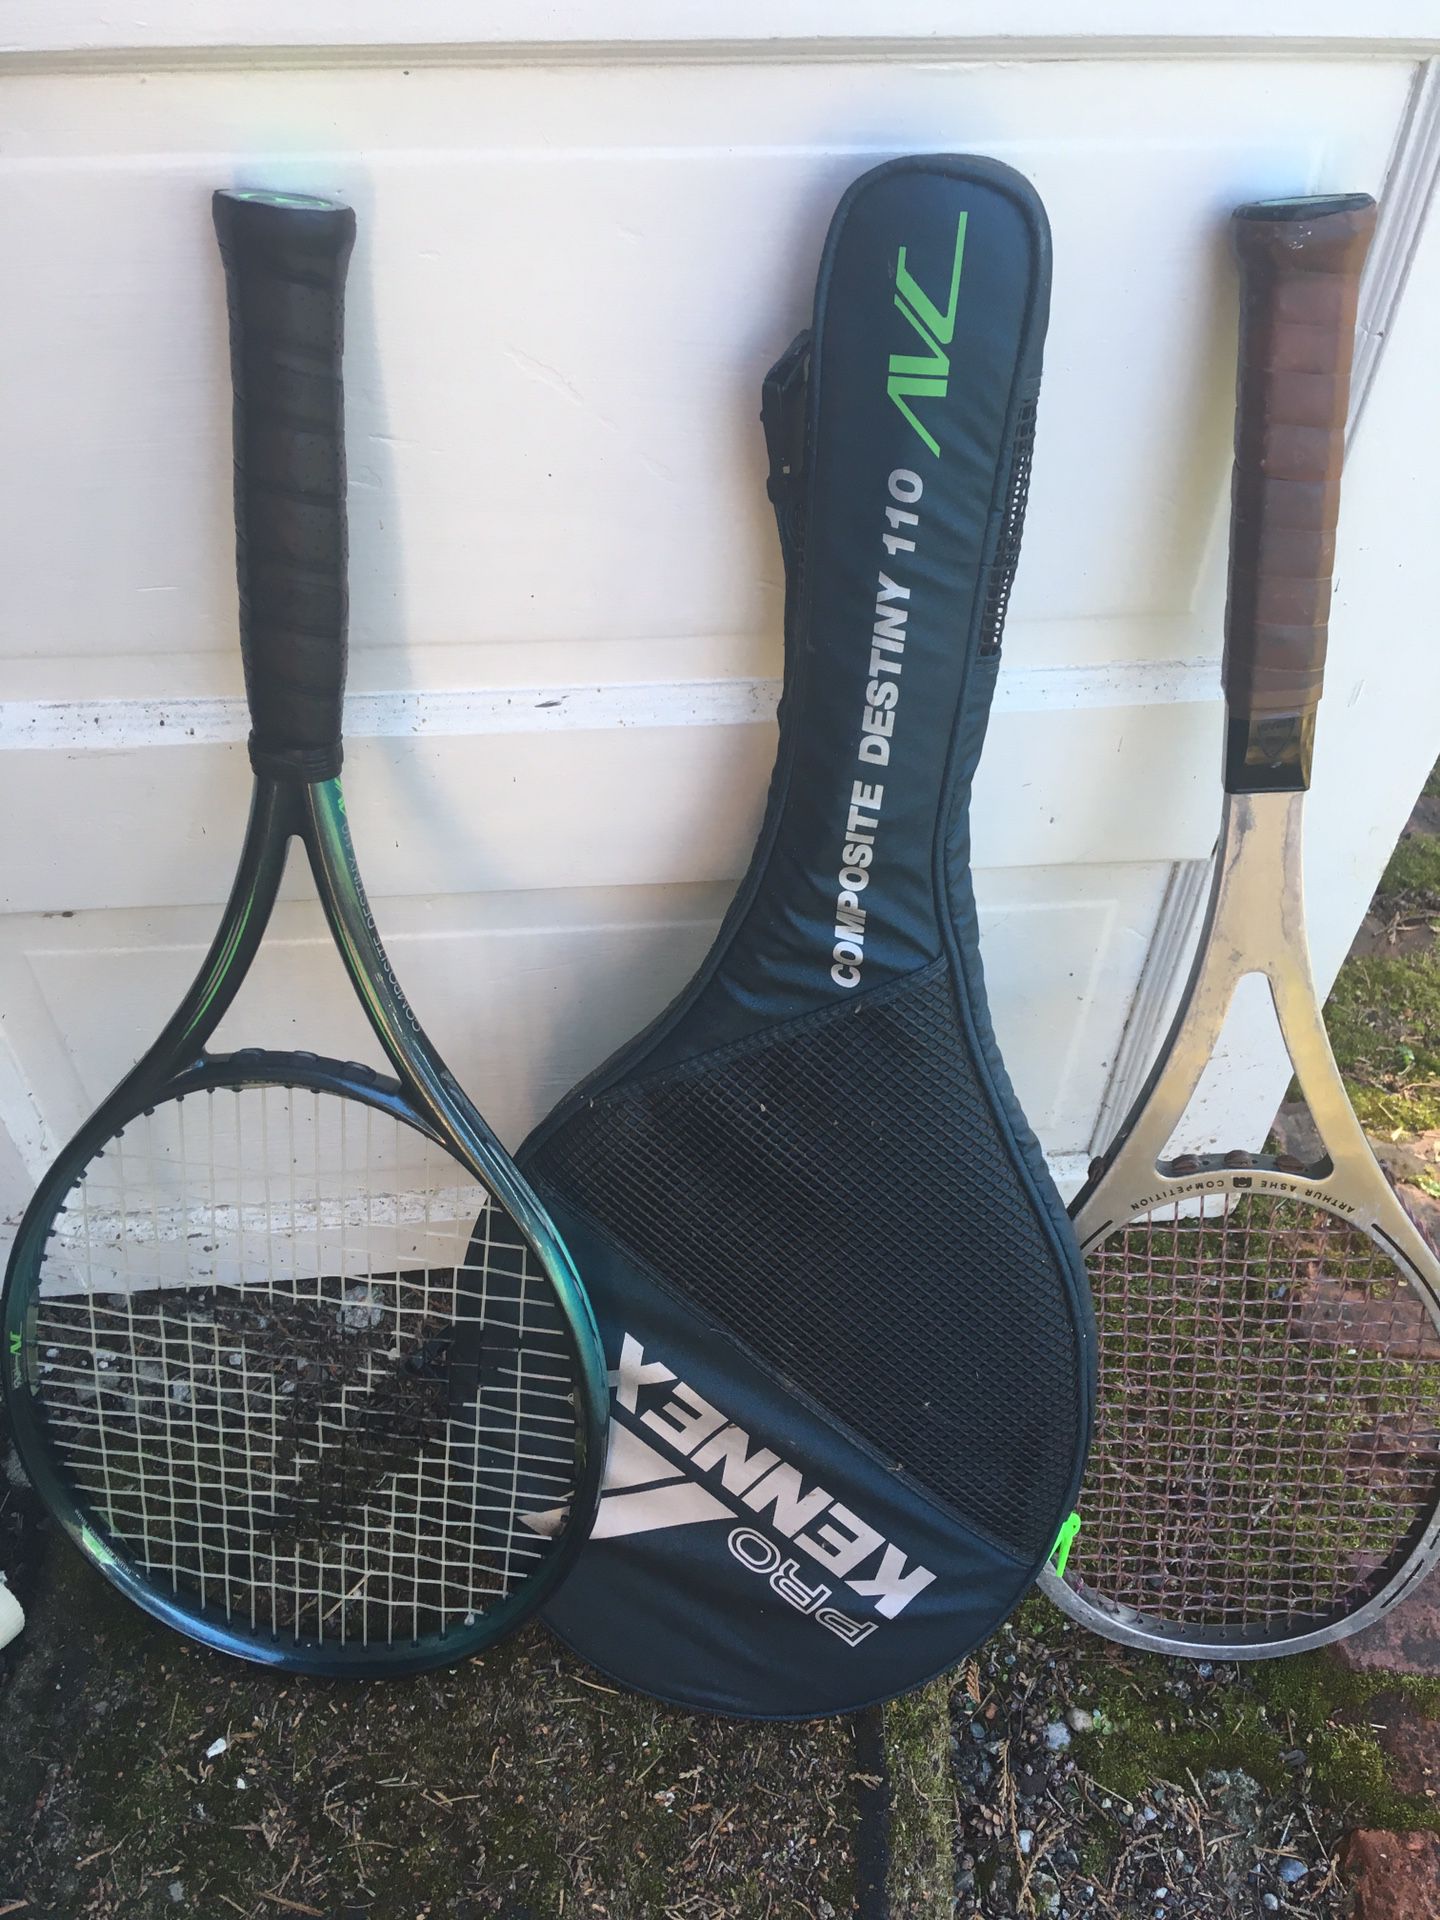 2 tennis racket & one cover